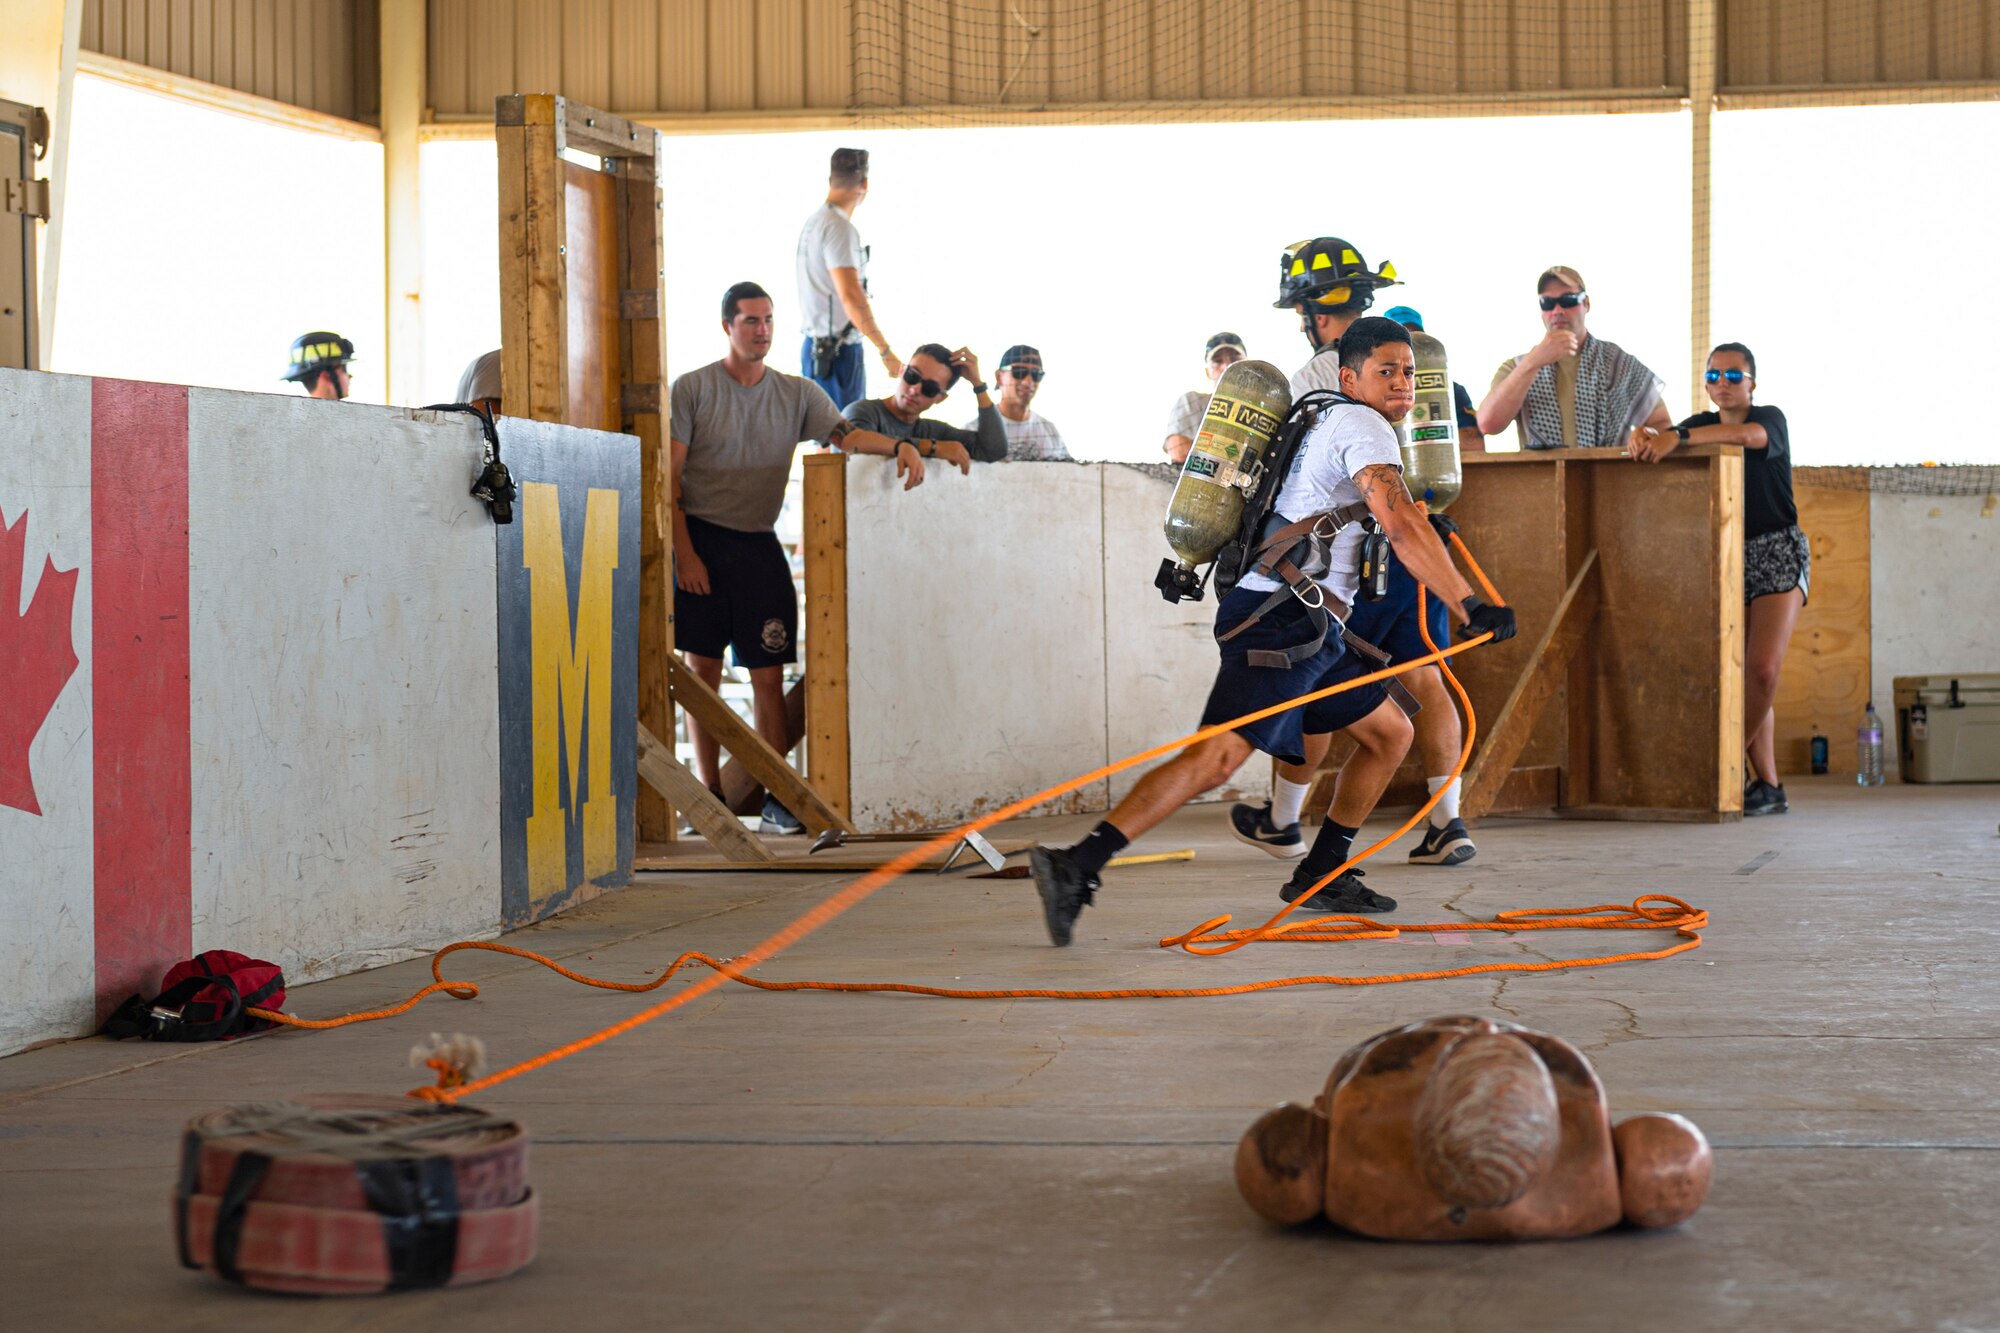 A photo of an Airman pulling a fire hose